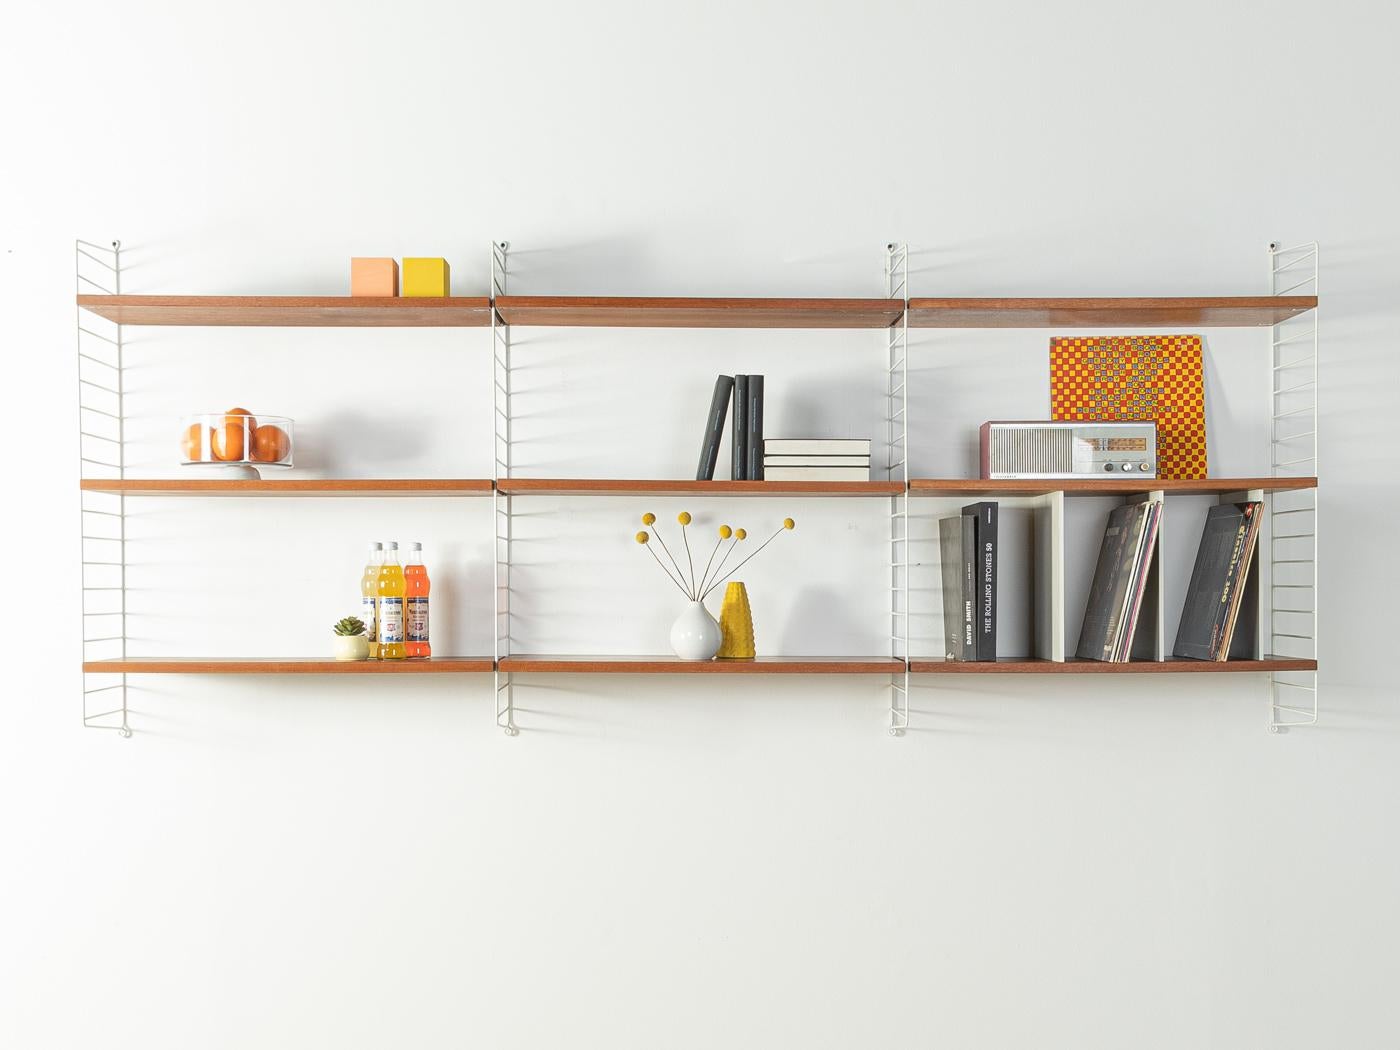 Original String shelf designed in 1949 by Nils Strinning in teak veneer. The system consists of four metal ladders in white with nine shelves and three rare white lacquered vinyl dividers.

This original String shelf is much better processed and